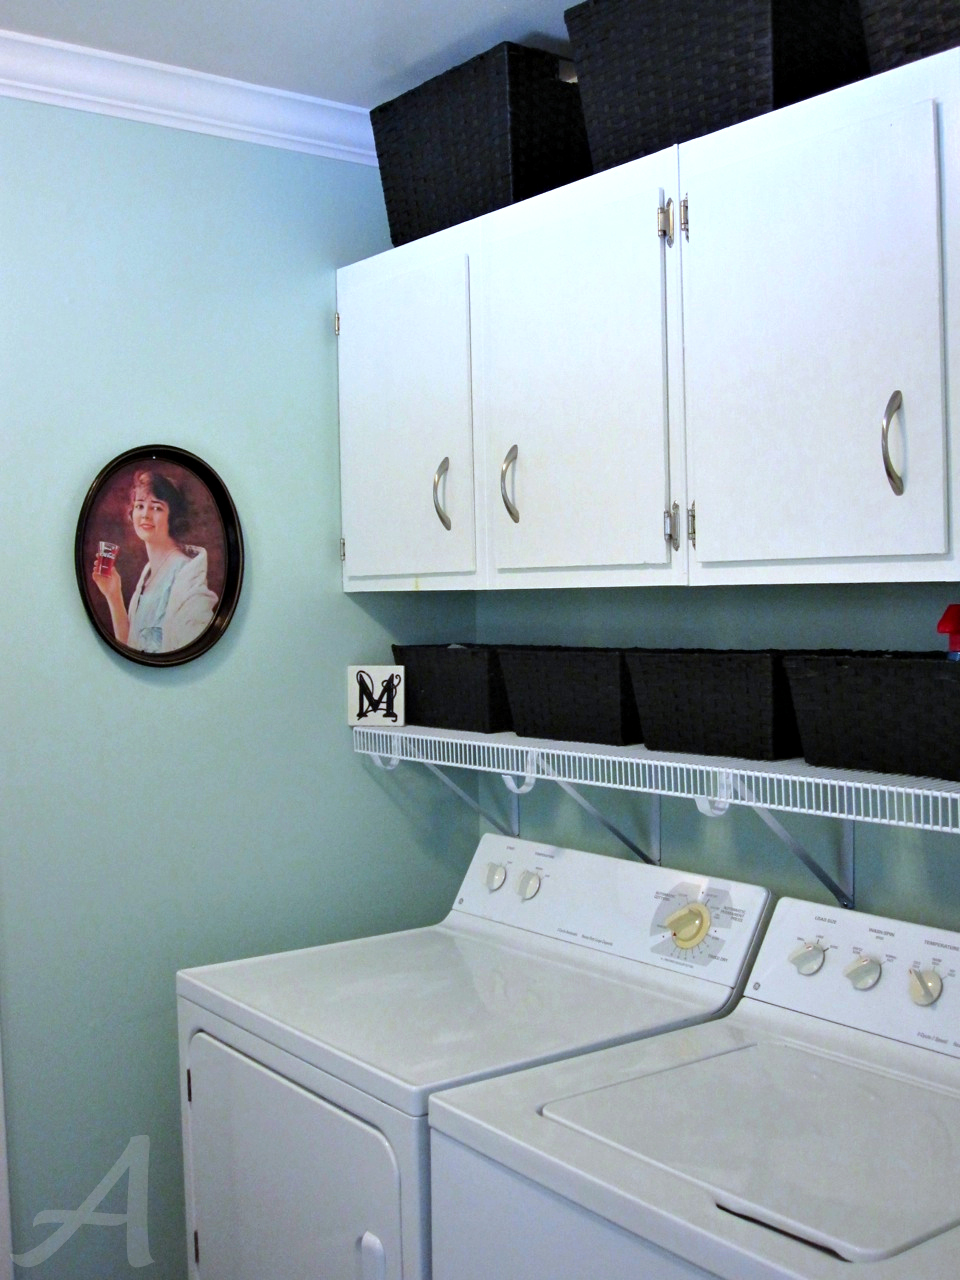 Getting Organized: The Laundry Room {tips and tricks} - Tatertots and Jello